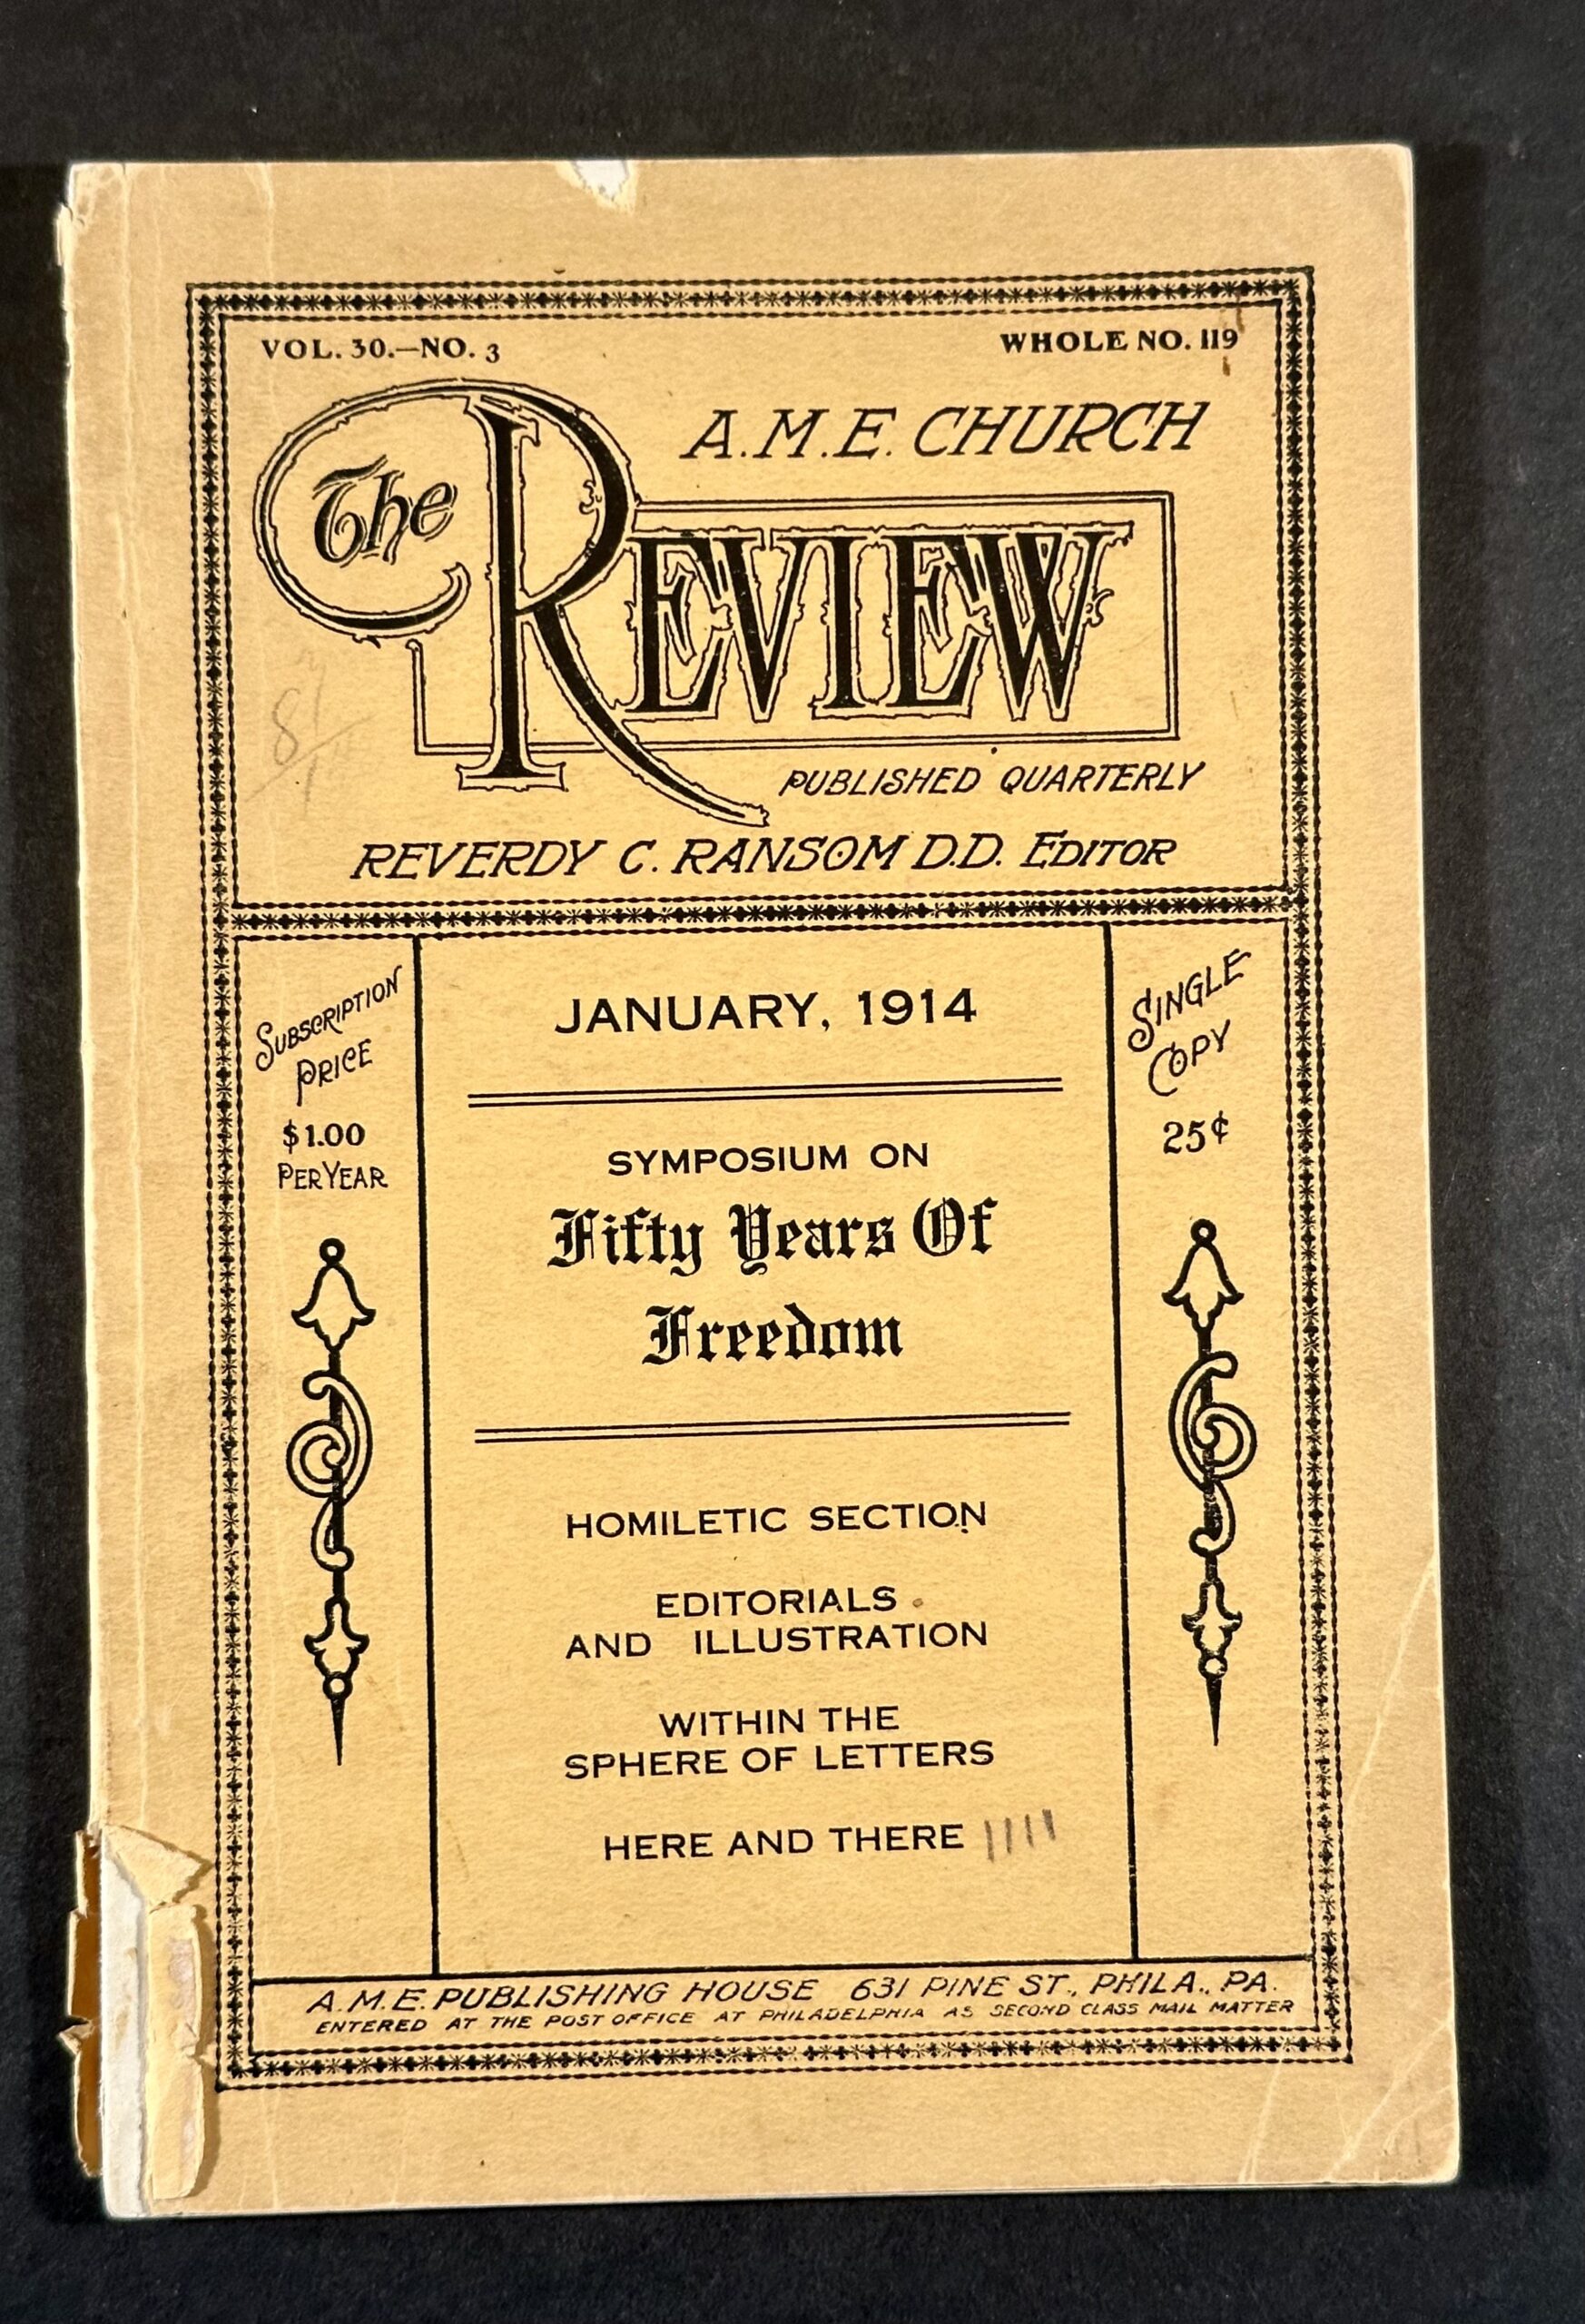 A.M.E. Publishing House. The A.M.E. Church Review, [January 1914], from the Alice Dunbar Nelson Papers collection